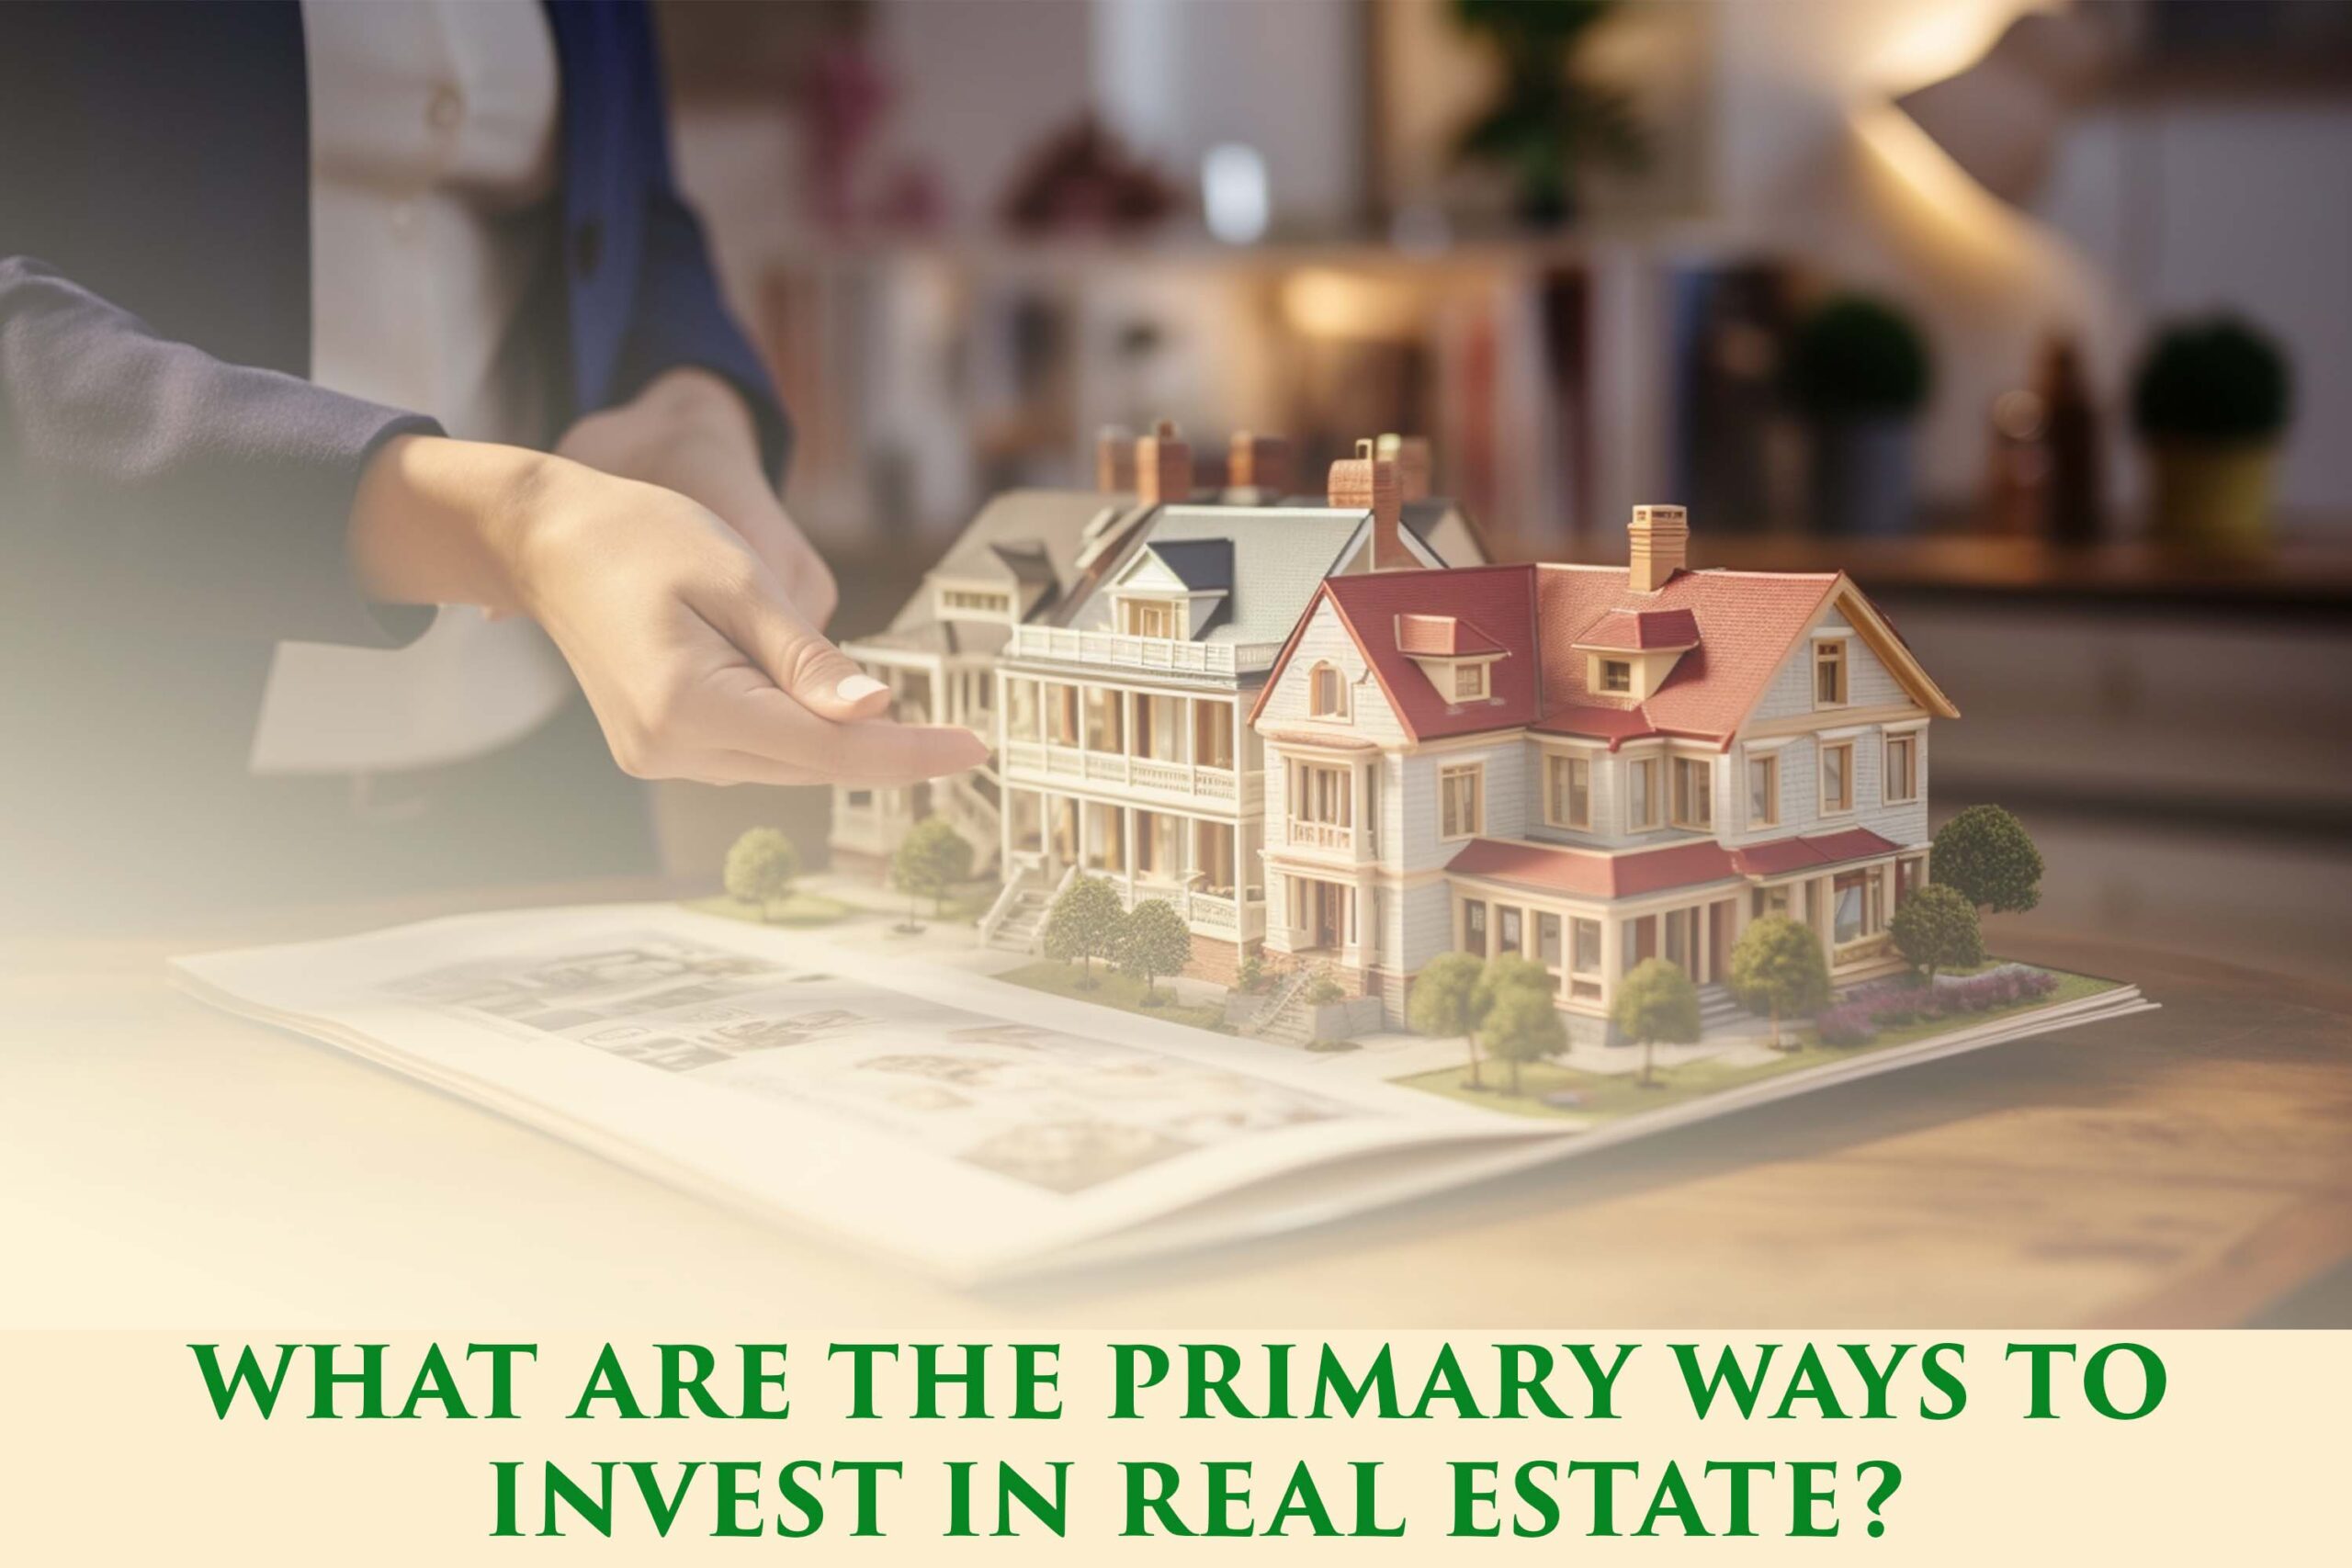 Primary Ways to Invest in Real Estate